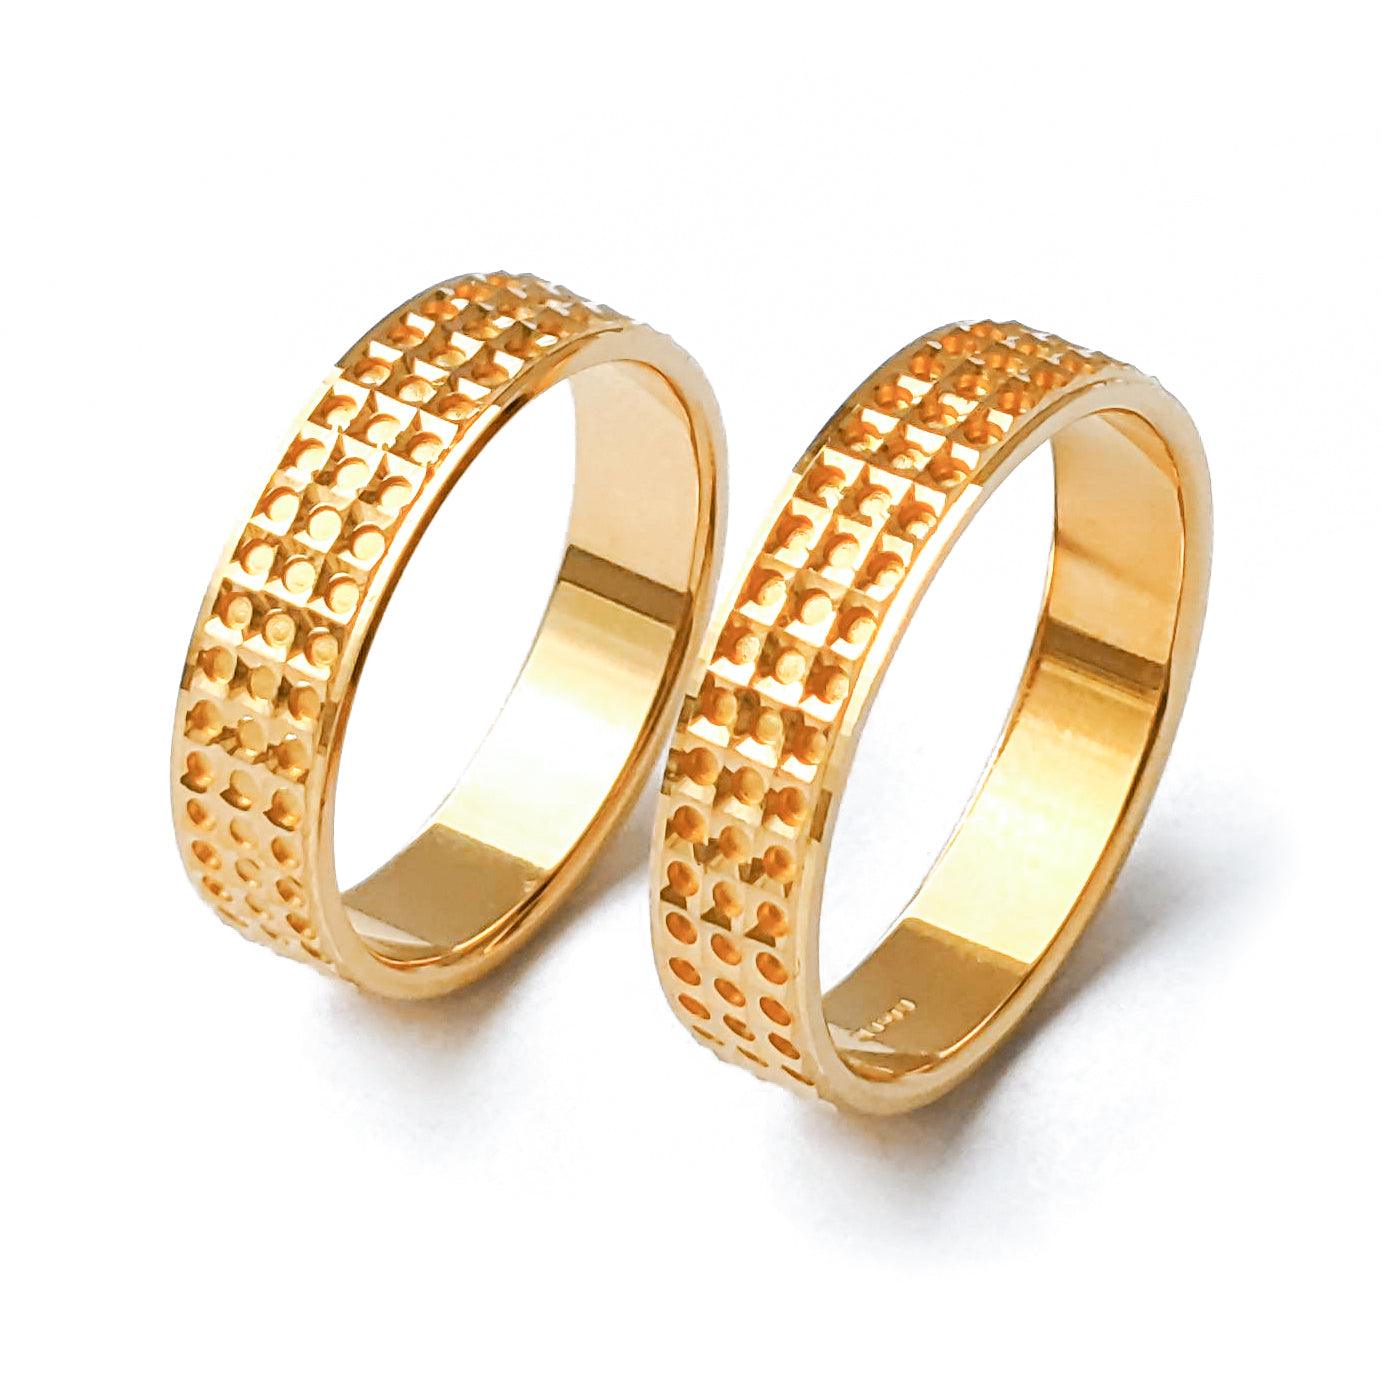 22ct Gold Wedding Band with Pitted Finish LR/GR-8219 - Minar Jewellers